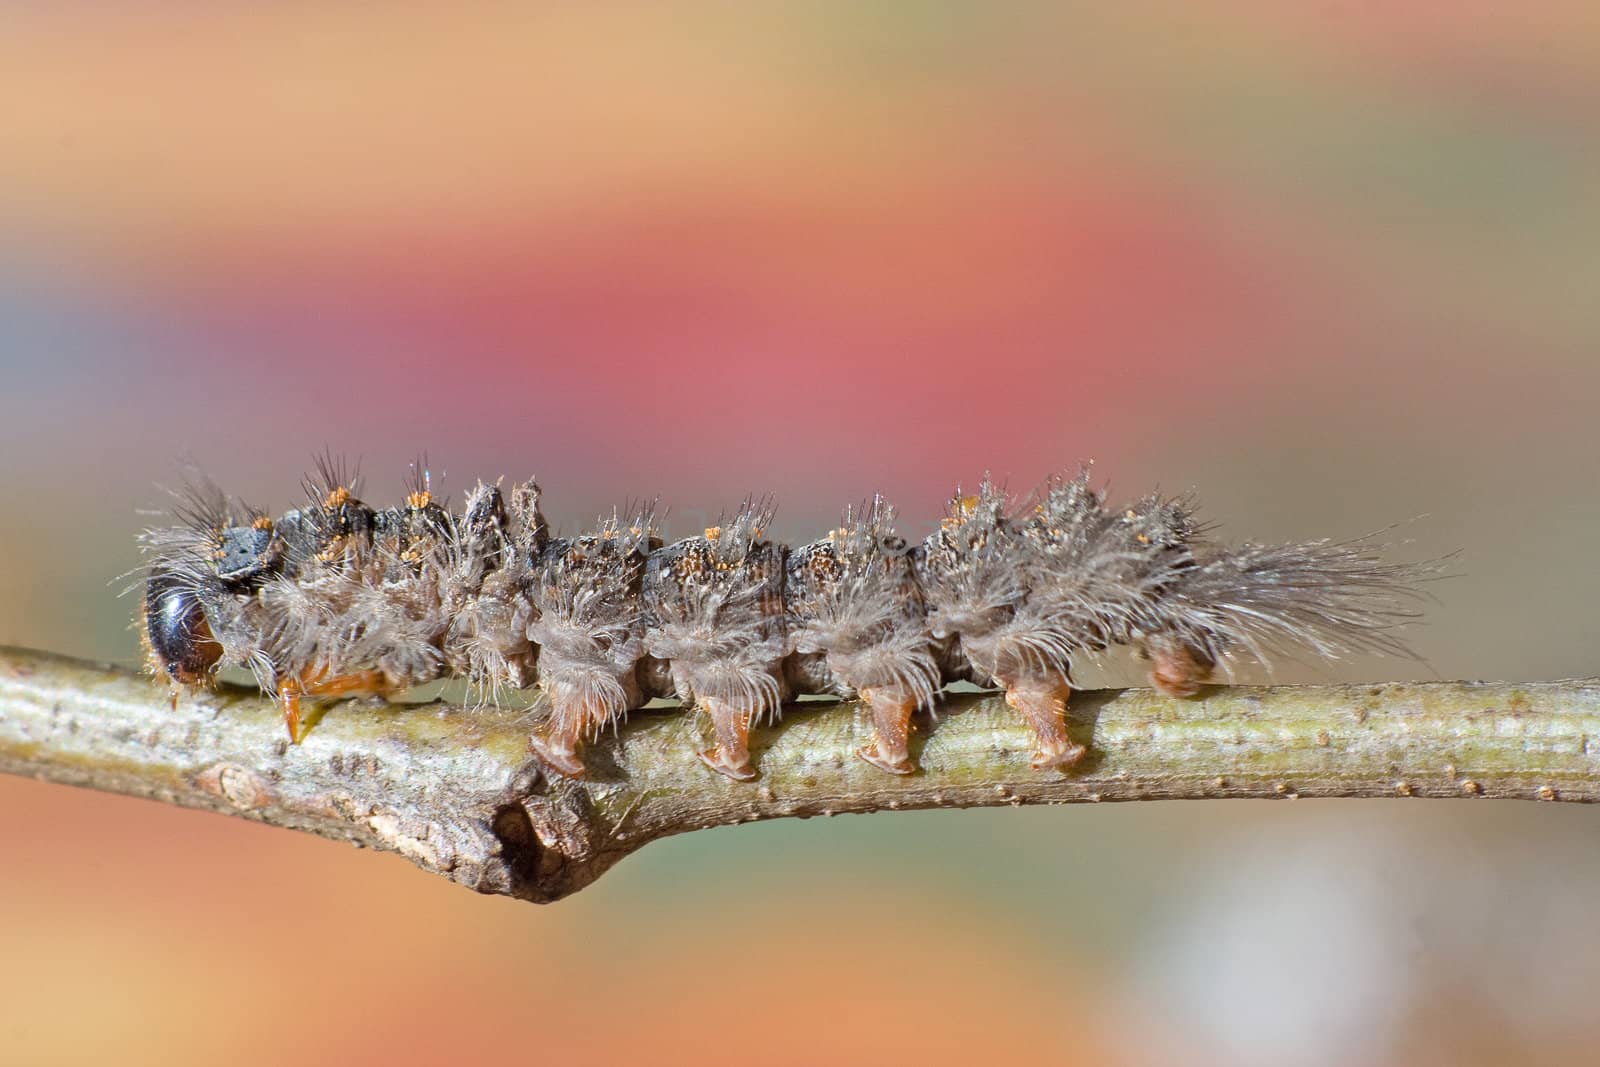 Hairy caterpillar on a twig by kobus_peche